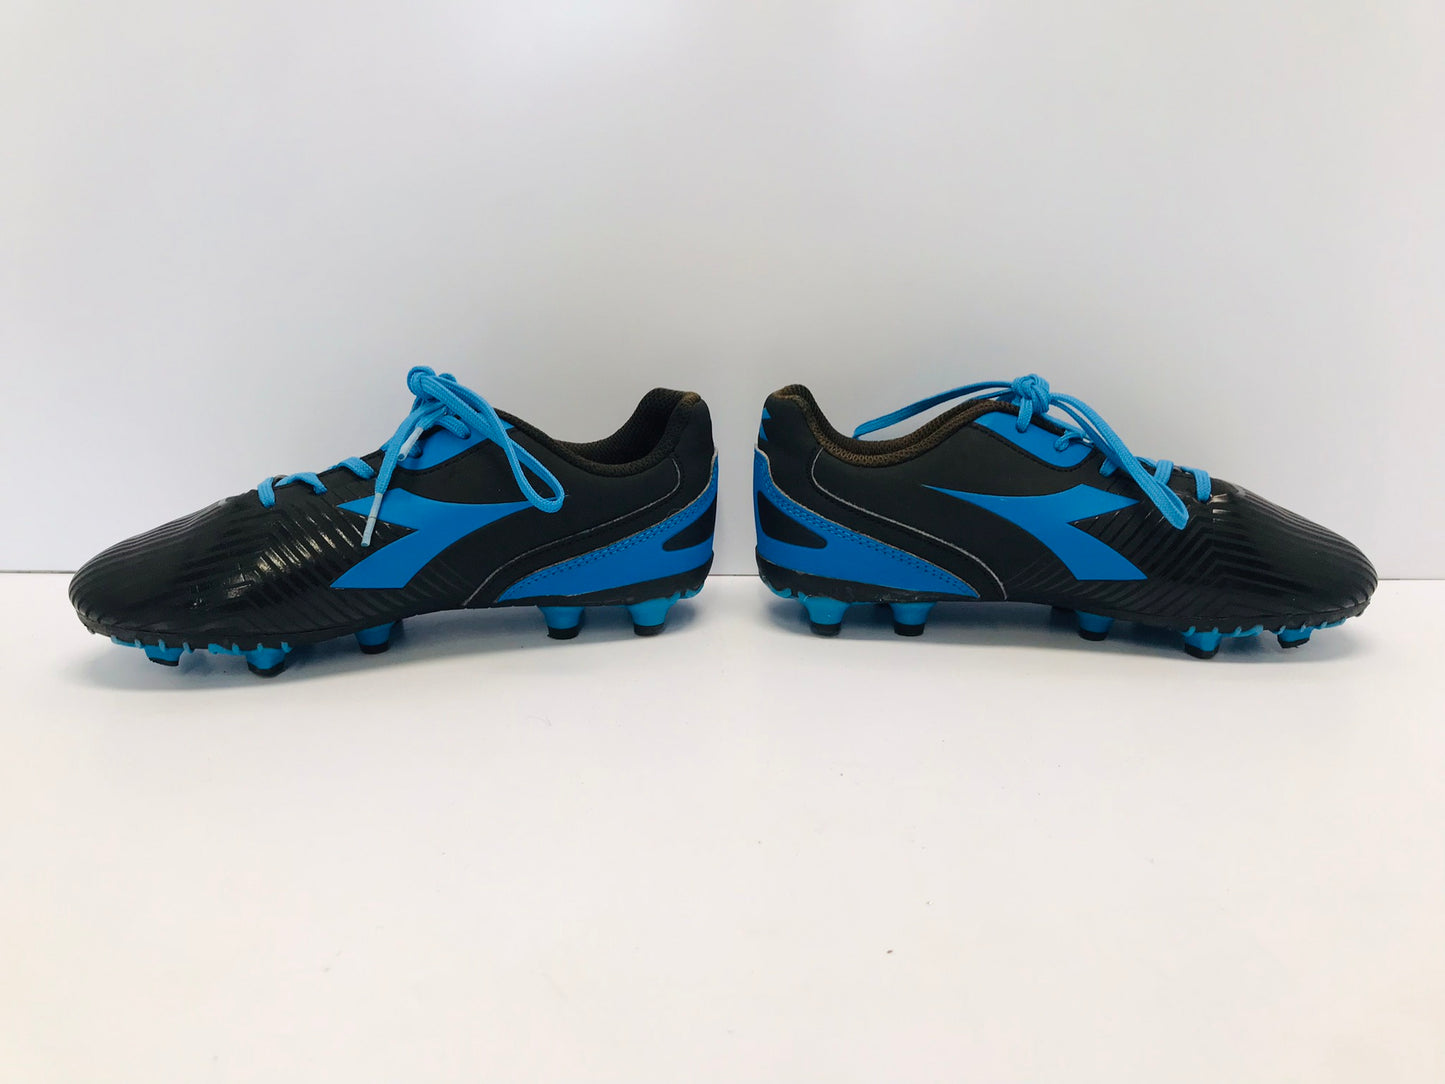 Soccer Shoes Cleats Child Size 3 Black Blue New Demo Model